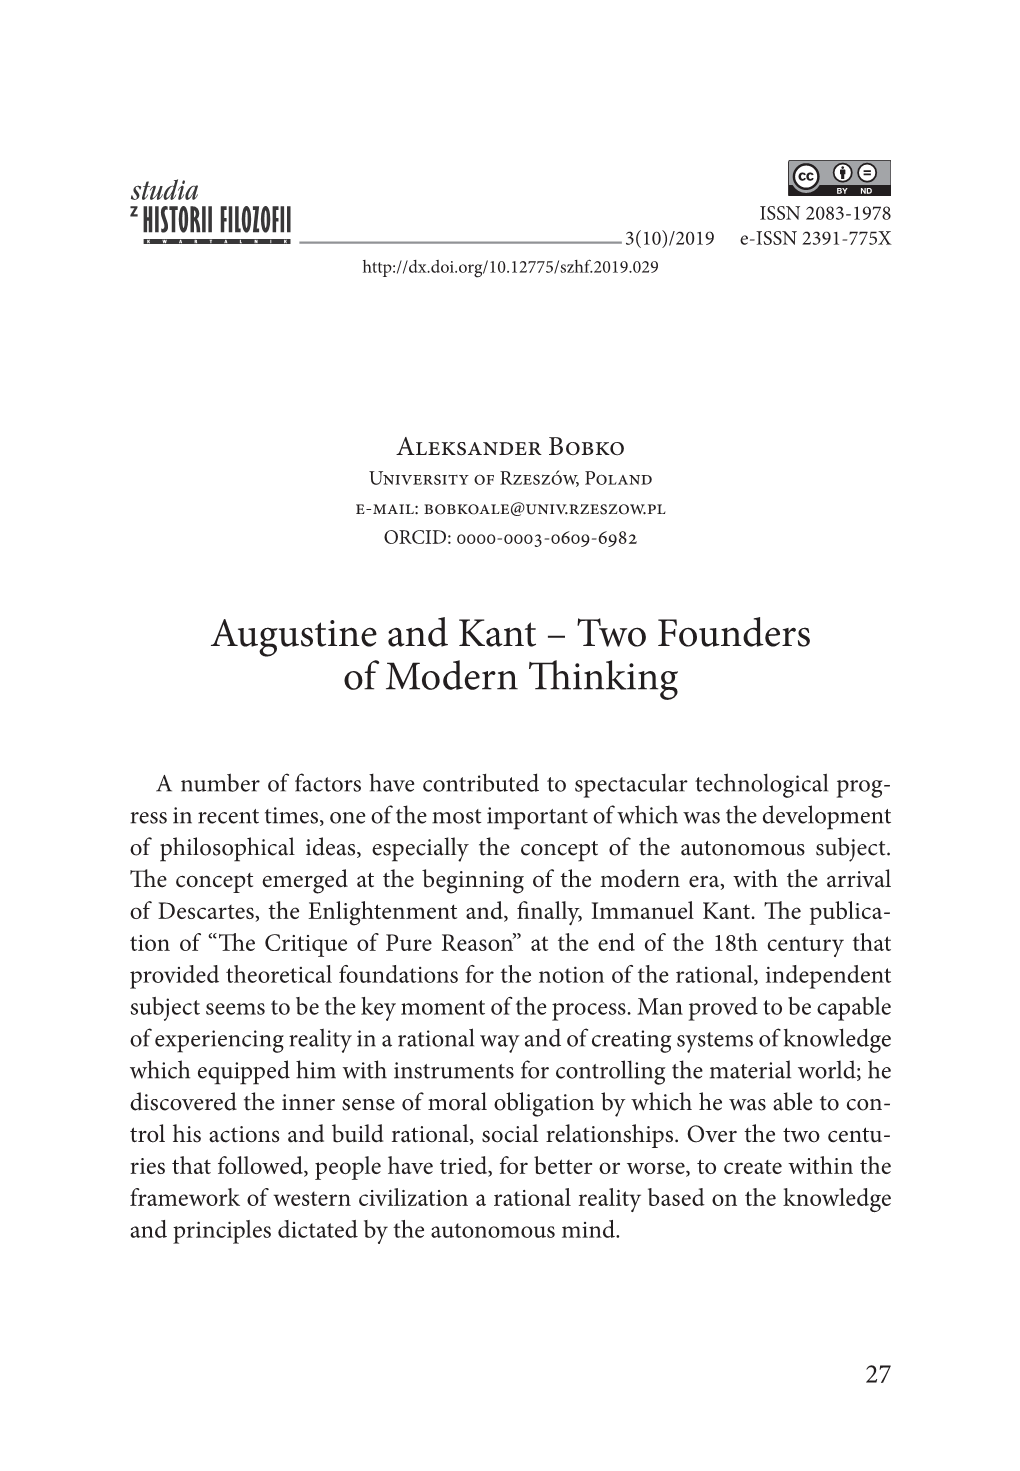 Augustine and Kant – Two Founders of Modern Thinking